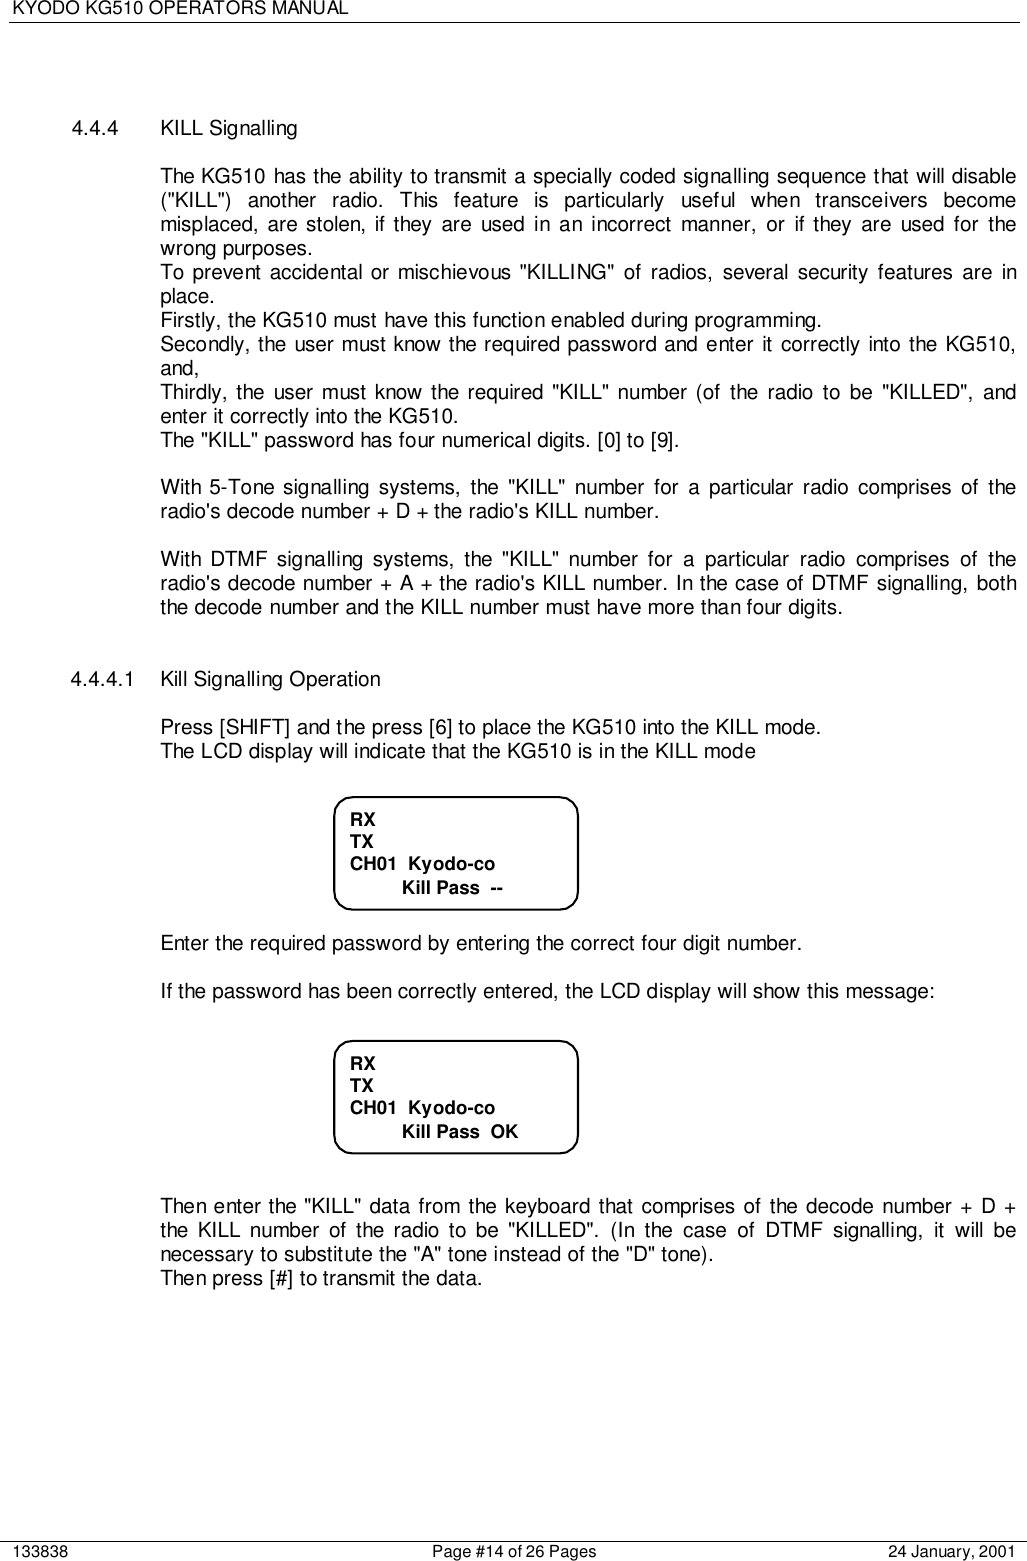 KYODO KG510 OPERATORS MANUAL133838 Page #14 of 26 Pages 24 January, 20014.4.4 KILL SignallingThe KG510 has the ability to transmit a specially coded signalling sequence that will disable(&quot;KILL&quot;) another radio. This feature is particularly useful when transceivers becomemisplaced, are stolen, if they are used in an incorrect manner, or if they are used for thewrong purposes.To prevent accidental or mischievous &quot;KILLING&quot; of radios, several security features are inplace.Firstly, the KG510 must have this function enabled during programming.Secondly, the user must know the required password and enter it correctly into the KG510,and,Thirdly, the user must know the required &quot;KILL&quot; number (of the radio to be &quot;KILLED&quot;, andenter it correctly into the KG510.The &quot;KILL&quot; password has four numerical digits. [0] to [9].With 5-Tone signalling systems, the &quot;KILL&quot; number for a particular radio comprises of theradio&apos;s decode number + D + the radio&apos;s KILL number.With DTMF signalling systems, the &quot;KILL&quot; number for a particular radio comprises of theradio&apos;s decode number + A + the radio&apos;s KILL number. In the case of DTMF signalling, boththe decode number and the KILL number must have more than four digits.4.4.4.1  Kill Signalling OperationPress [SHIFT] and the press [6] to place the KG510 into the KILL mode.The LCD display will indicate that the KG510 is in the KILL modeEnter the required password by entering the correct four digit number.If the password has been correctly entered, the LCD display will show this message:Then enter the &quot;KILL&quot; data from the keyboard that comprises of the decode number + D +the KILL number of the radio to be &quot;KILLED&quot;. (In the case of DTMF signalling, it will benecessary to substitute the &quot;A&quot; tone instead of the &quot;D&quot; tone).Then press [#] to transmit the data.RXTXCH01  Kyodo-co          Kill Pass  OKRXTXCH01  Kyodo-co          Kill Pass  --